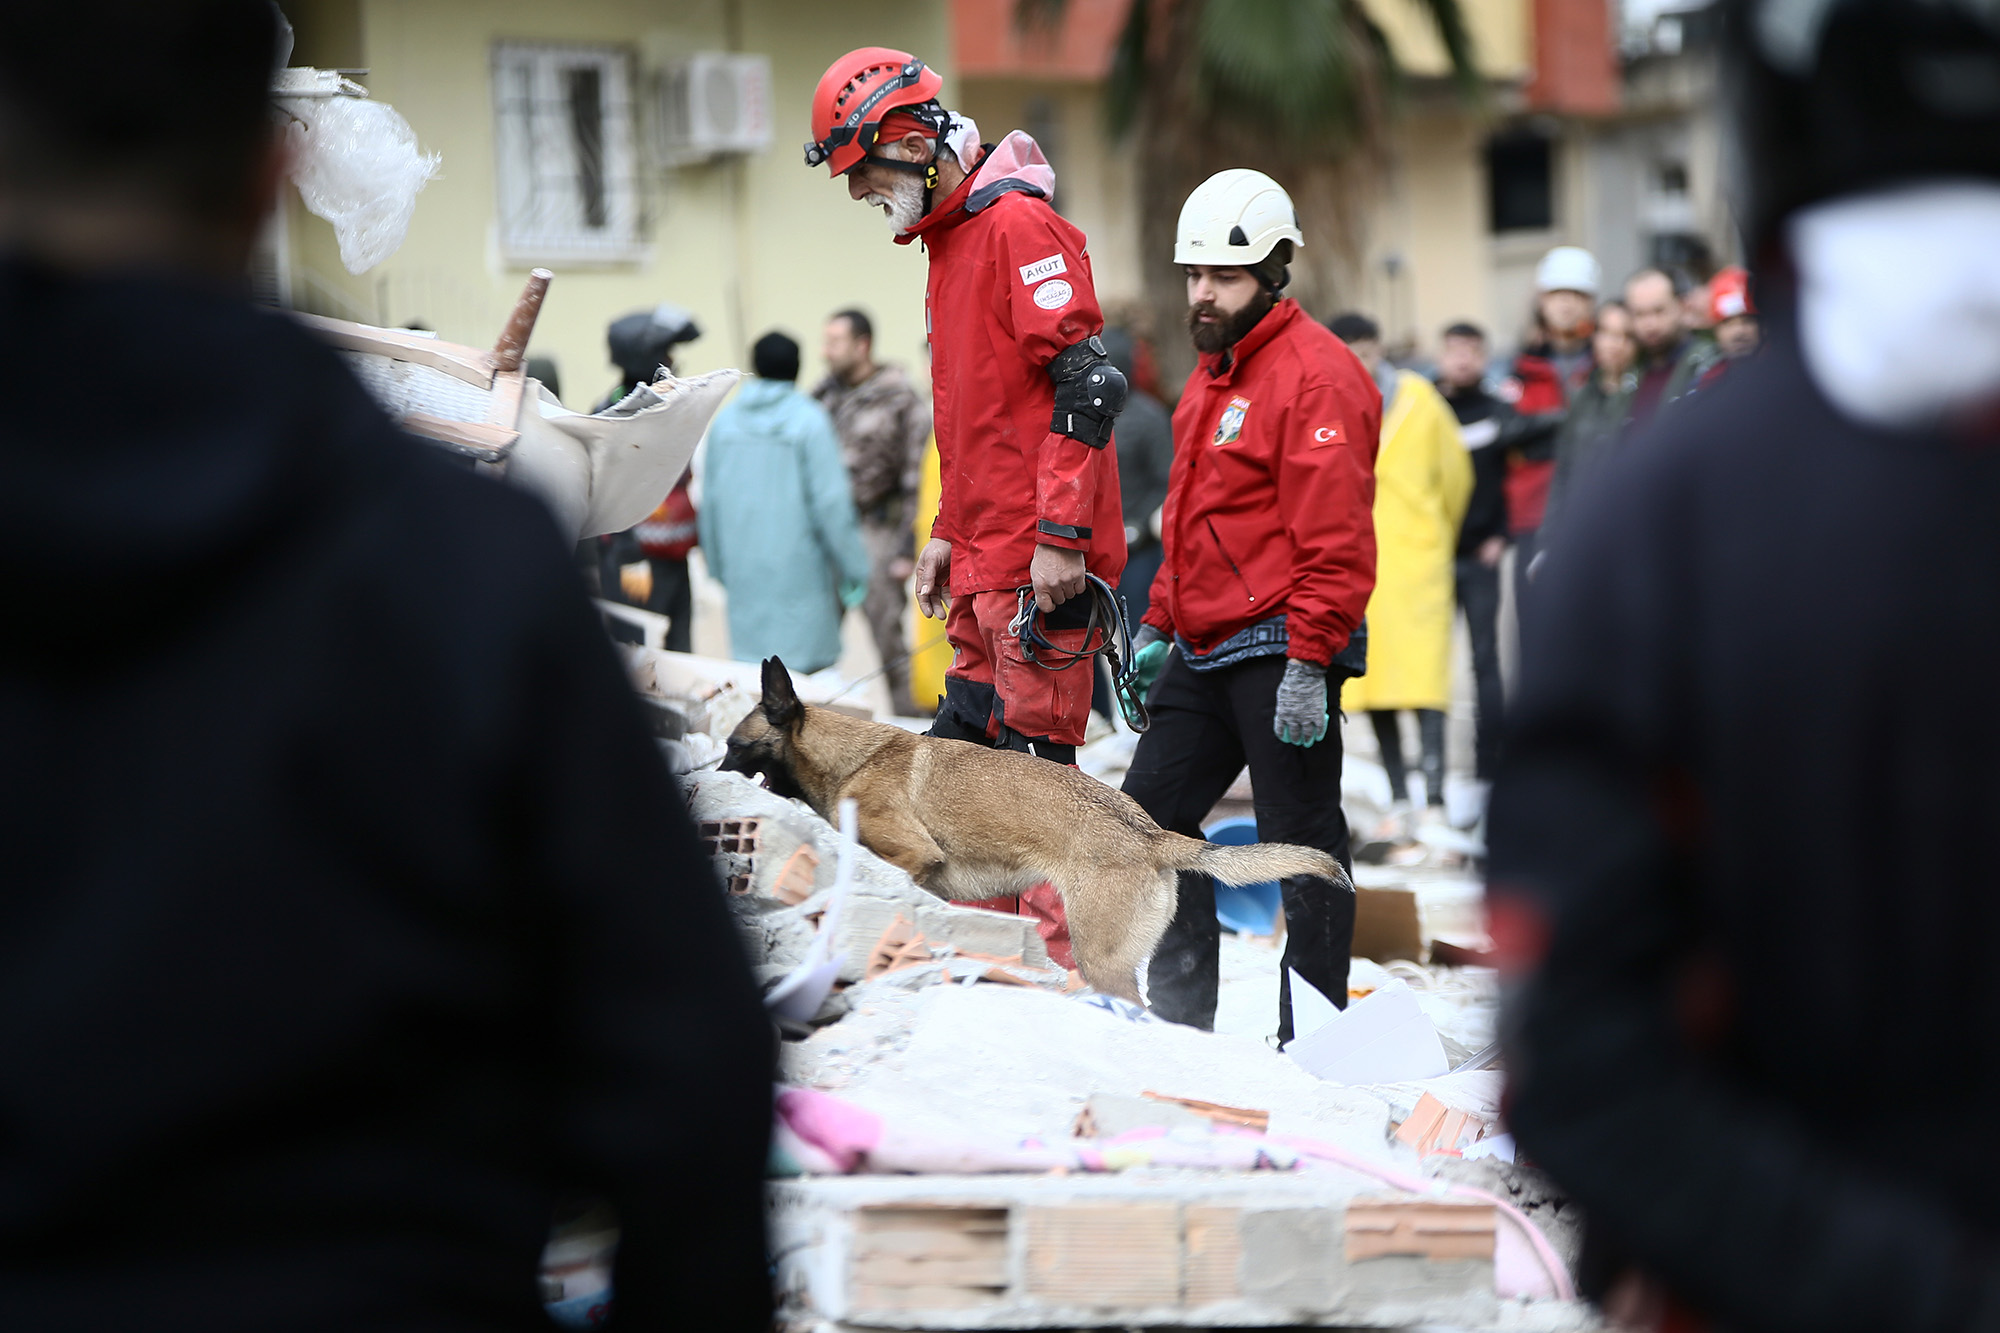 Search and rescue efforts continue on collapsed 14-store-building in Adana, Turkey, on February 6.